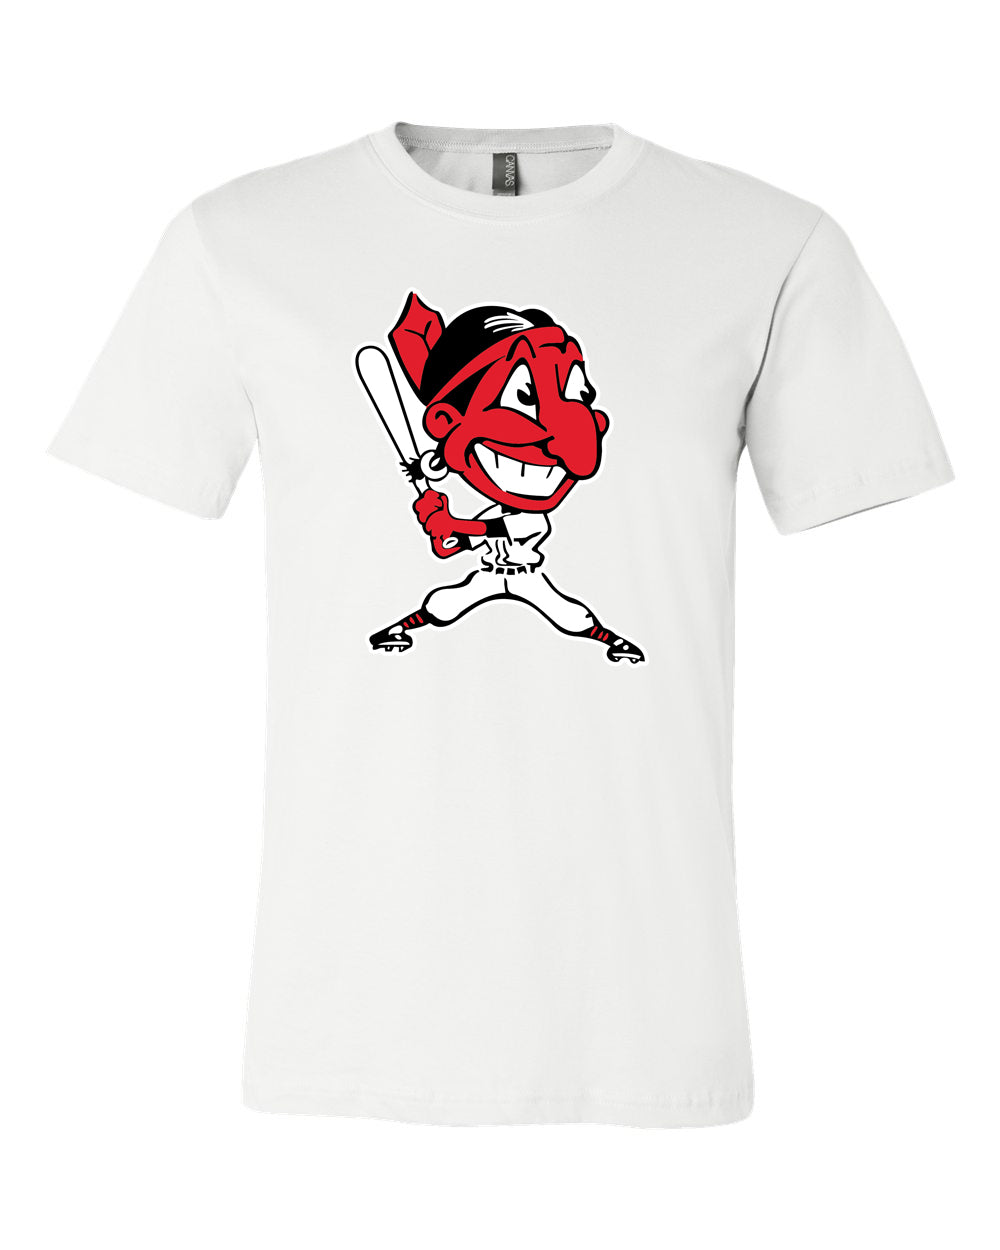 Cleveland Indians Chief Wahoo Up to Bat T-shirt 6 Sizes S-5XL!! Fast S